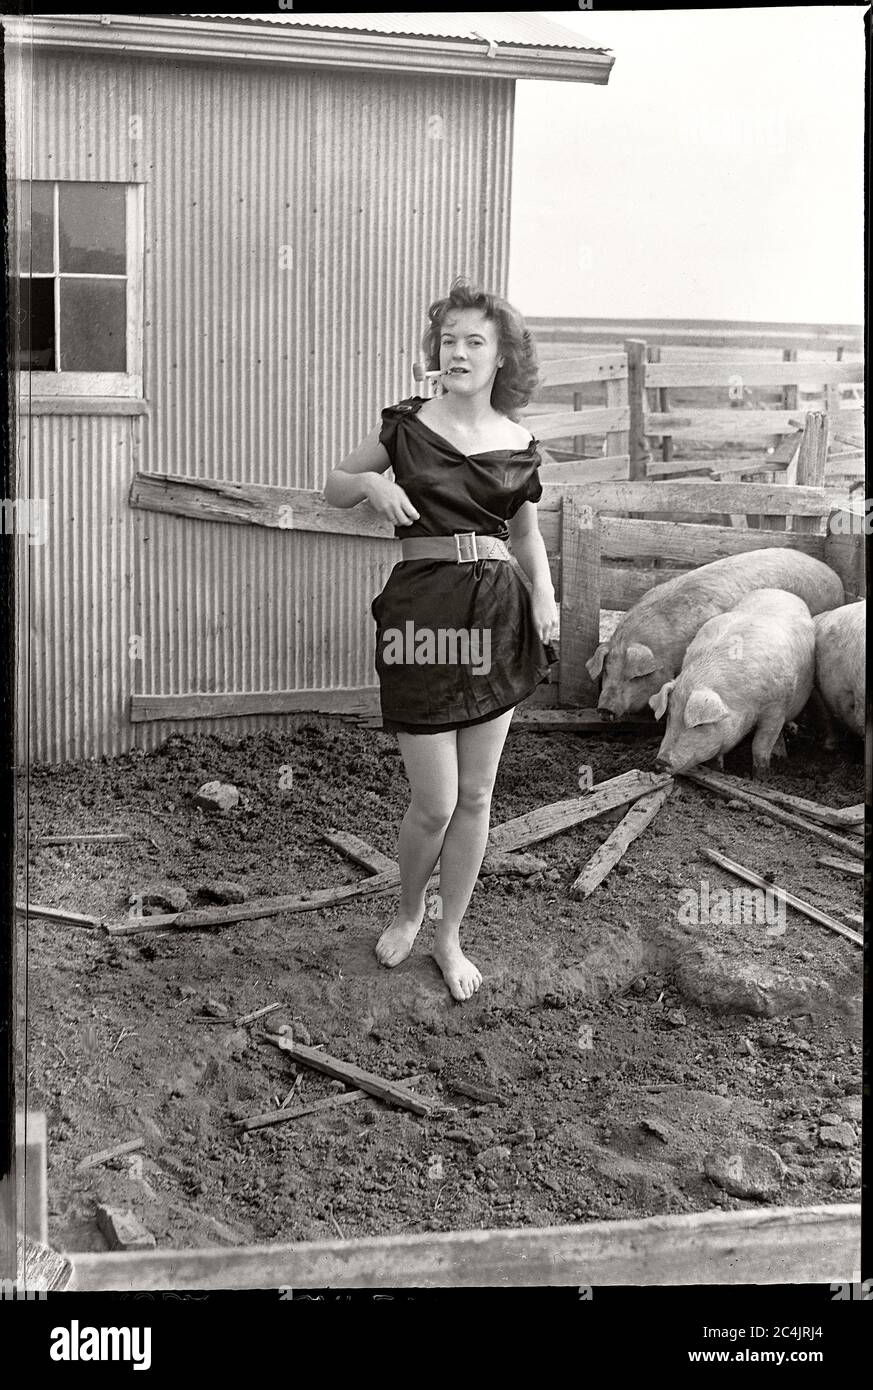 Barefoot farm girl in black dress smoking a pipe in a pig sty, circa 1950. Image from 2x3 inch negative. Stock Photo